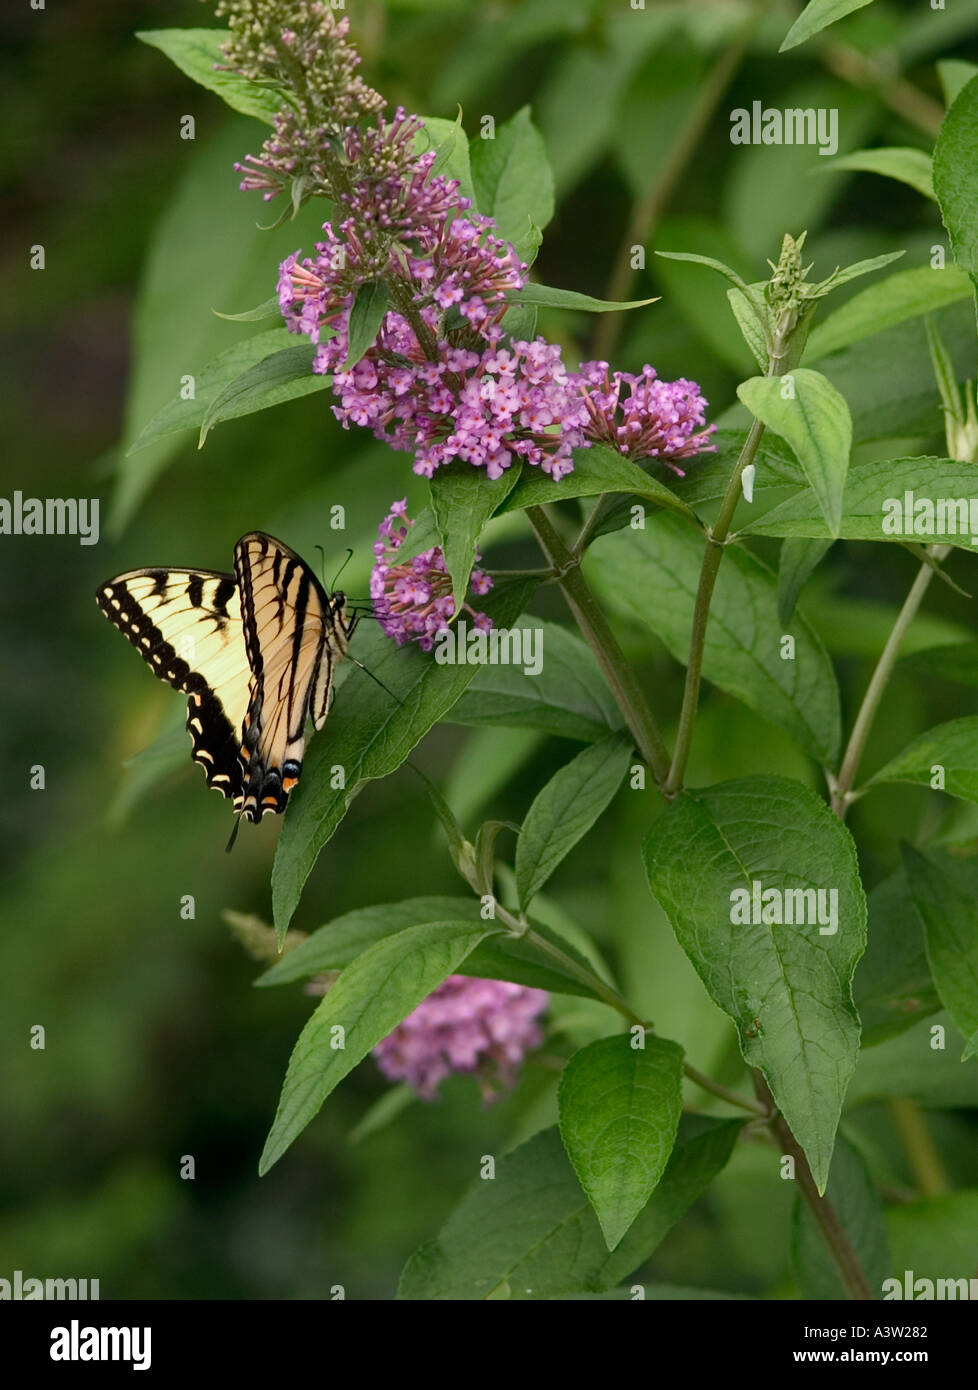 Eastern Tiger Swallowtail Butterfly on lilac bush Stock Photo